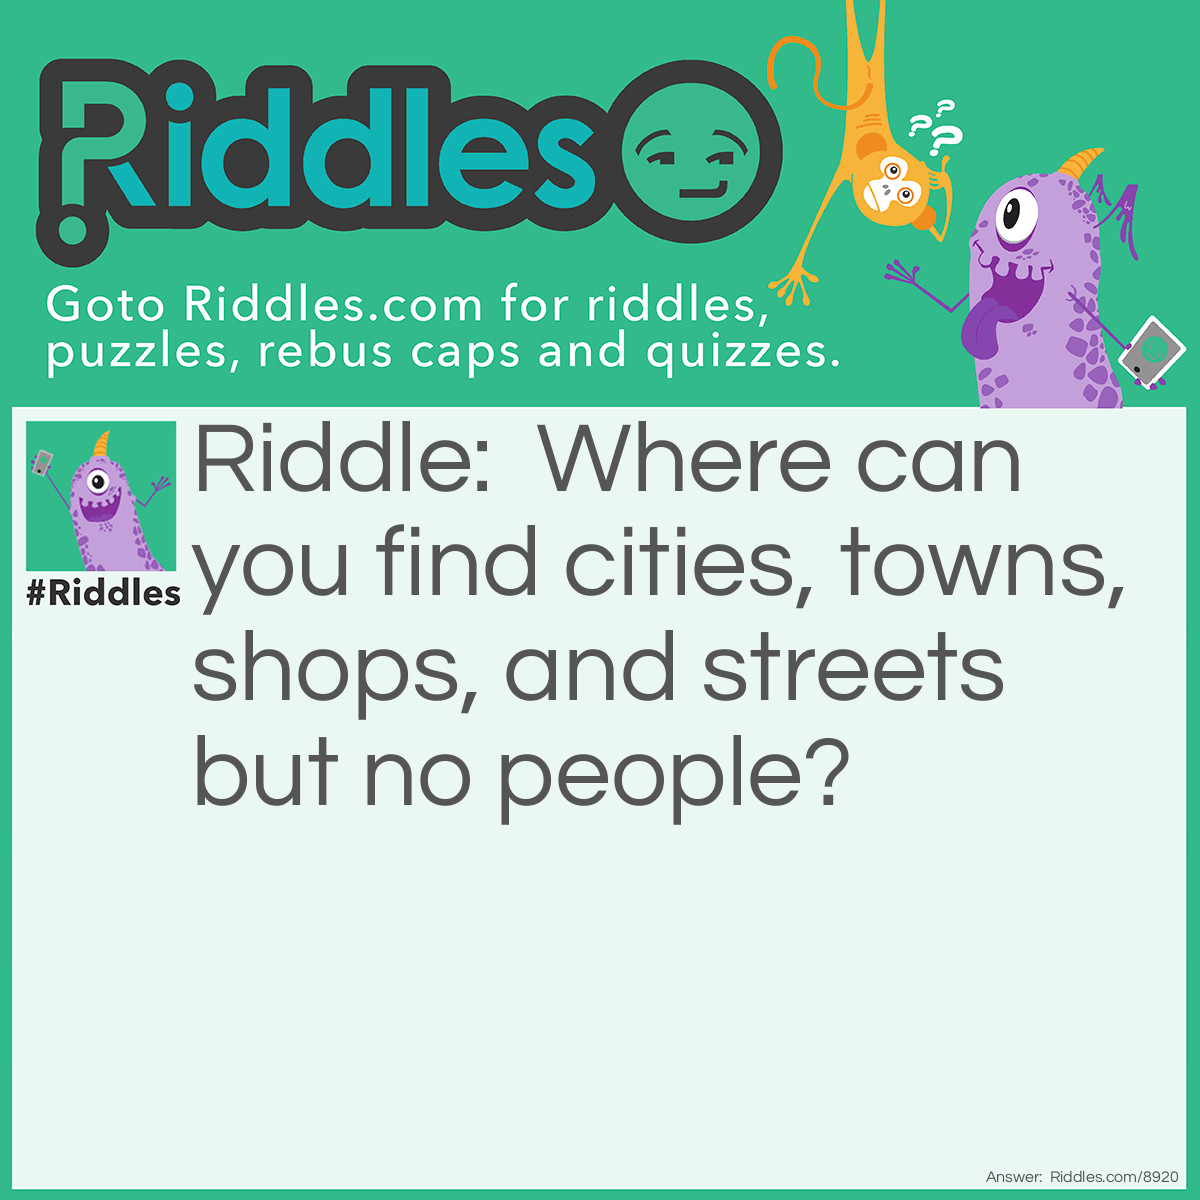 Riddle: Where can you find cities, towns, shops, and streets but no people? Answer: A map.